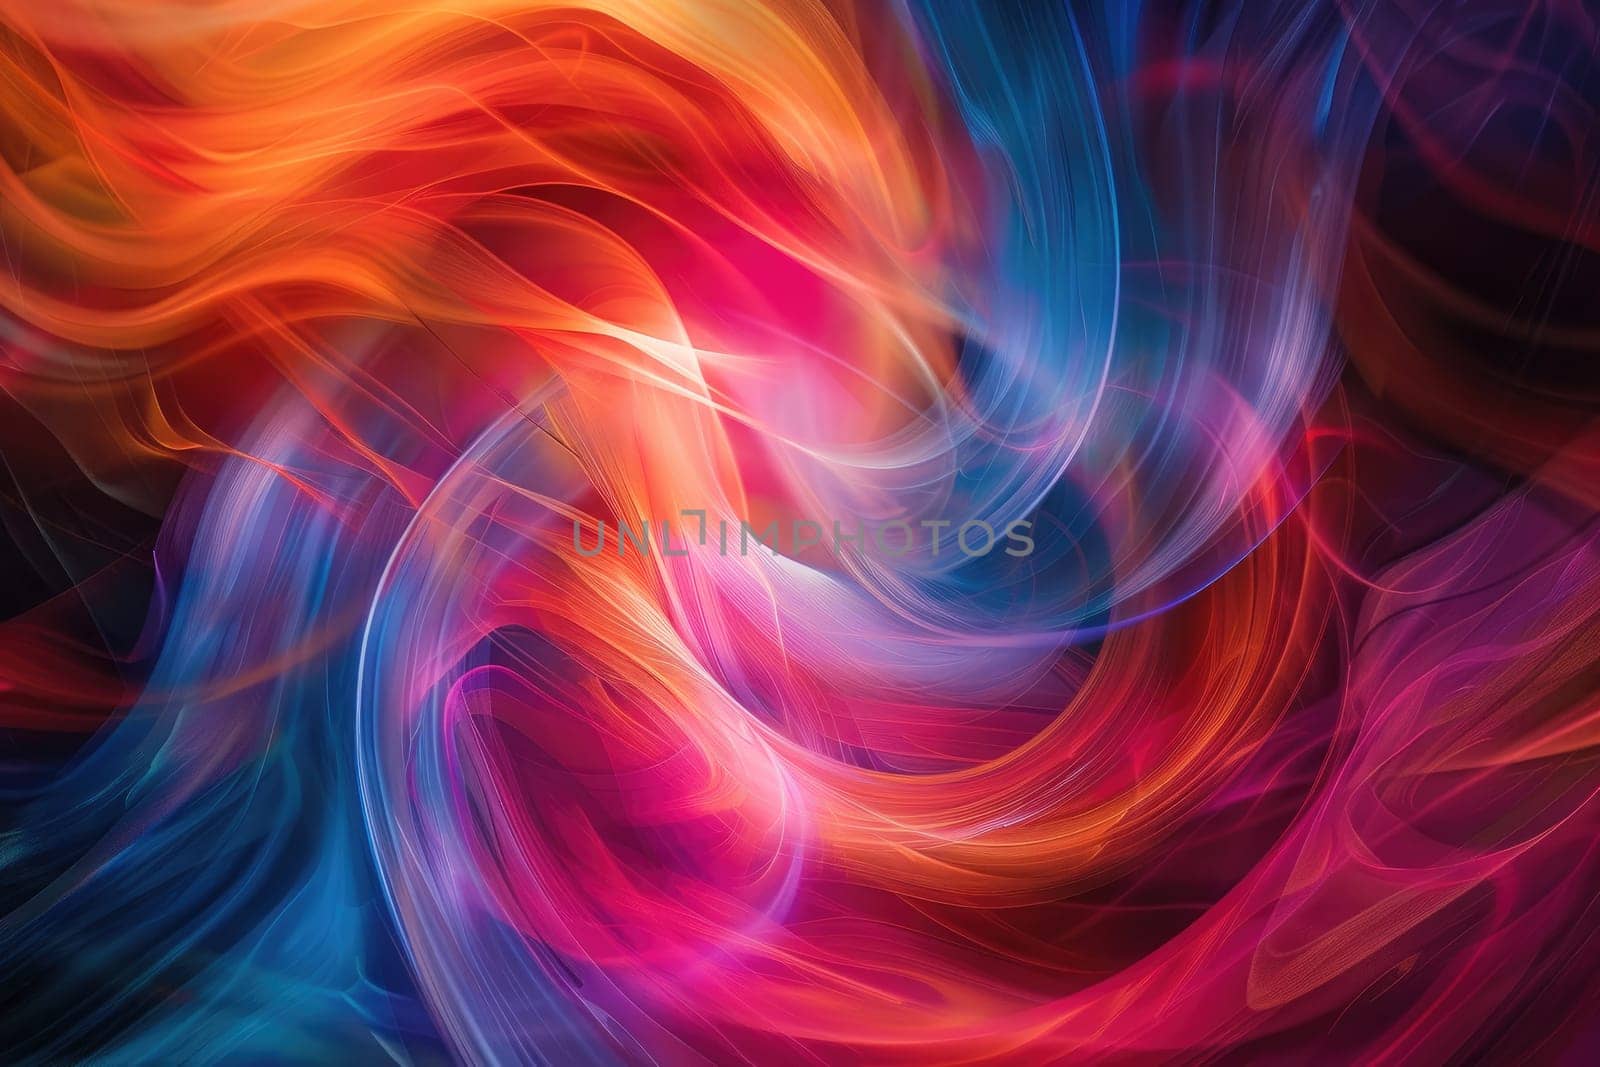 A light painting of swirling colors representing the different hues of gemstones, creating an abstract and vibrant image